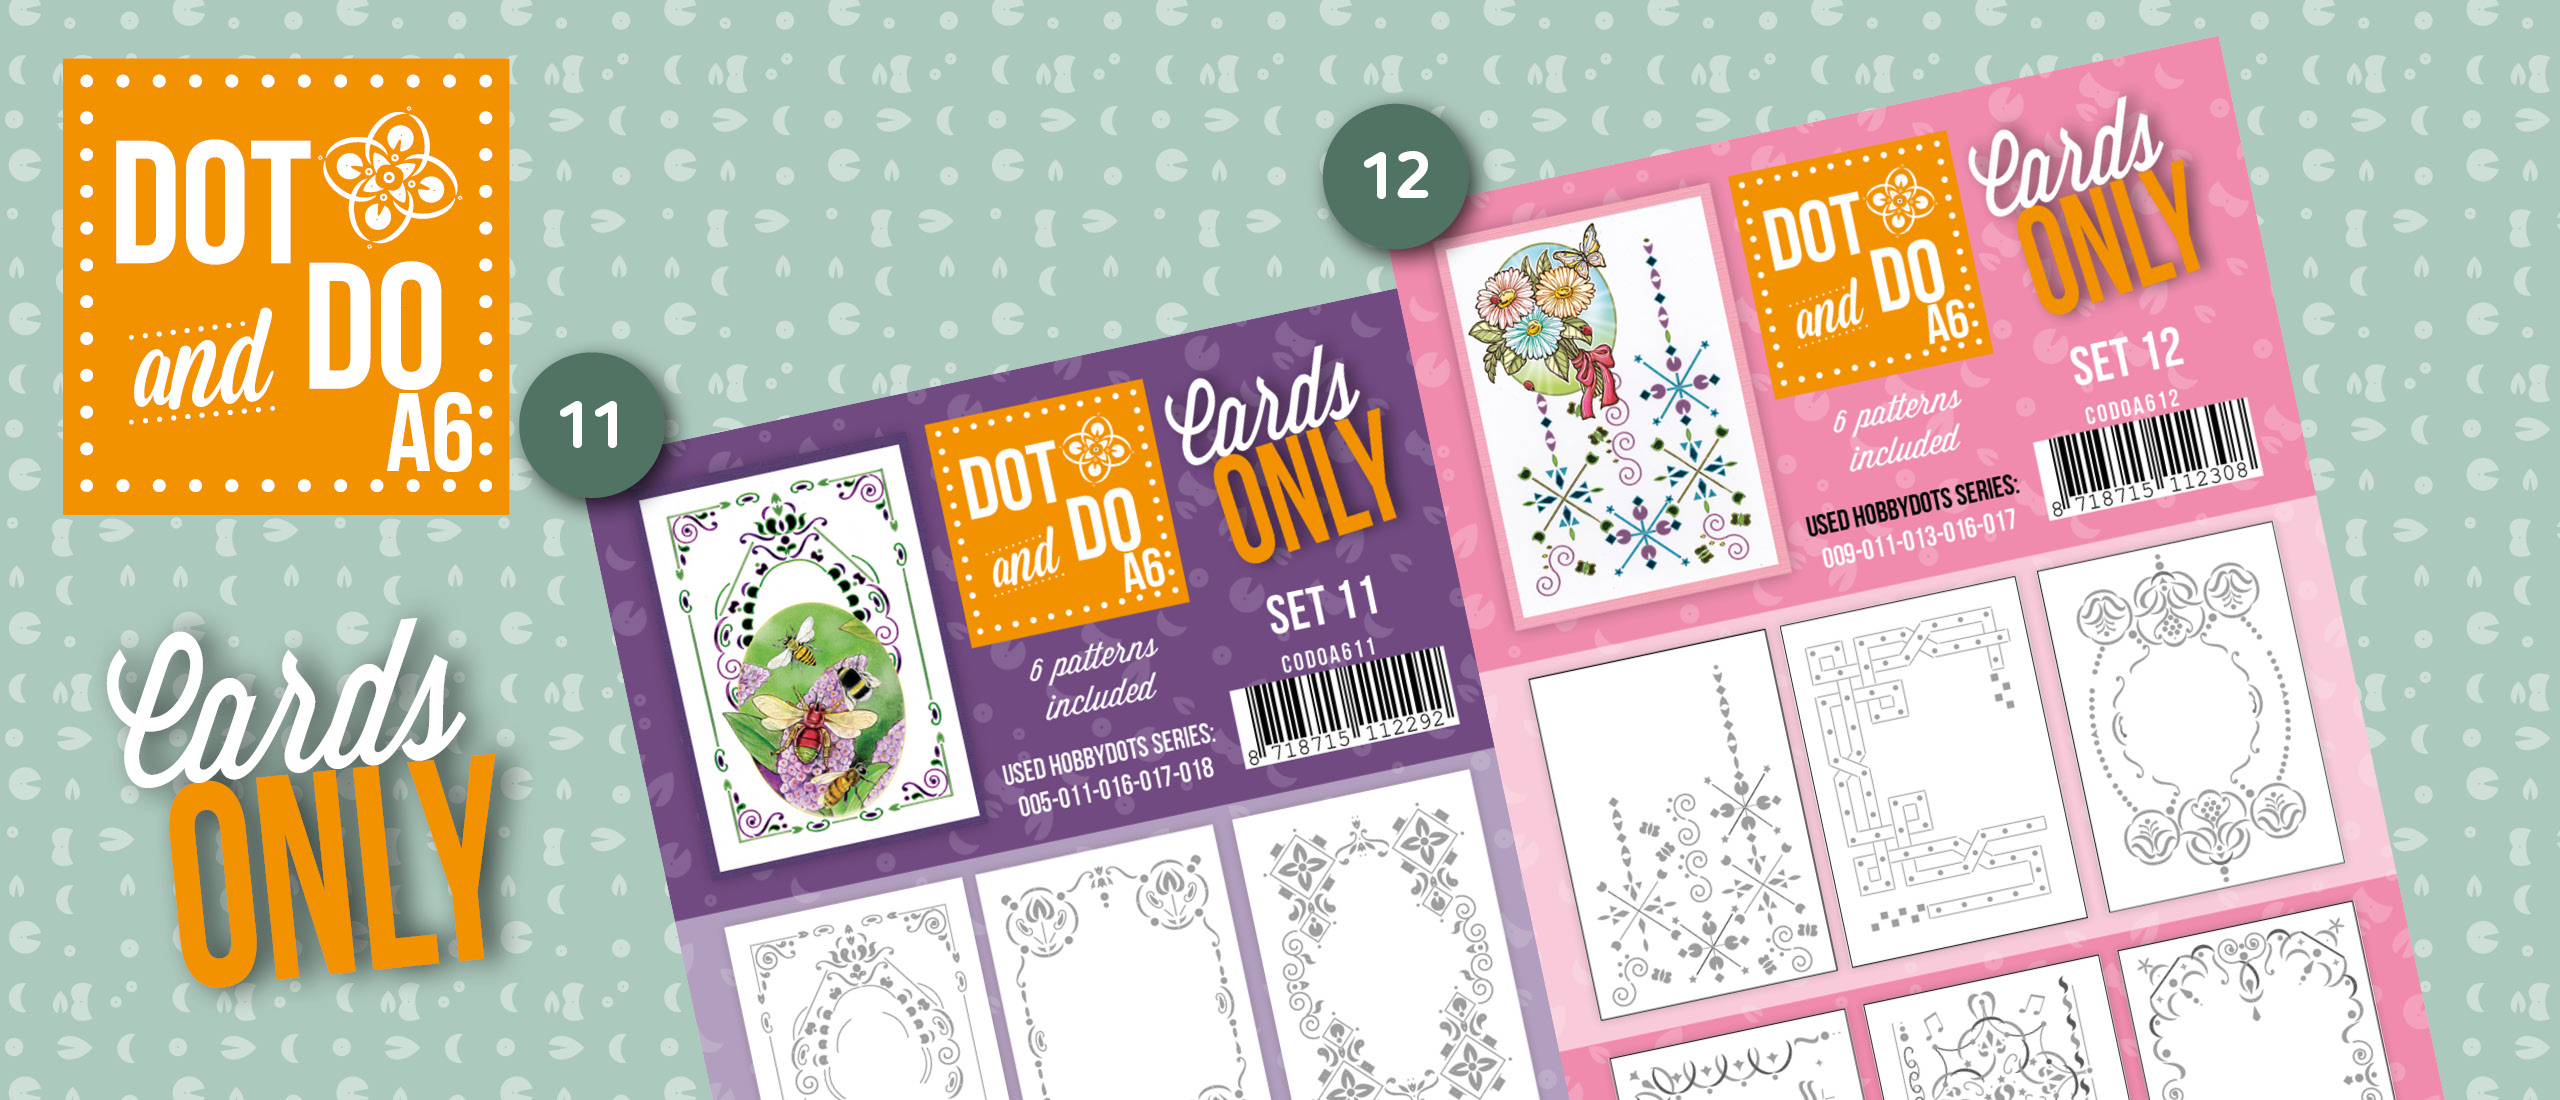 Dot and Do Cards Only A6 nr 11 en nr 12!